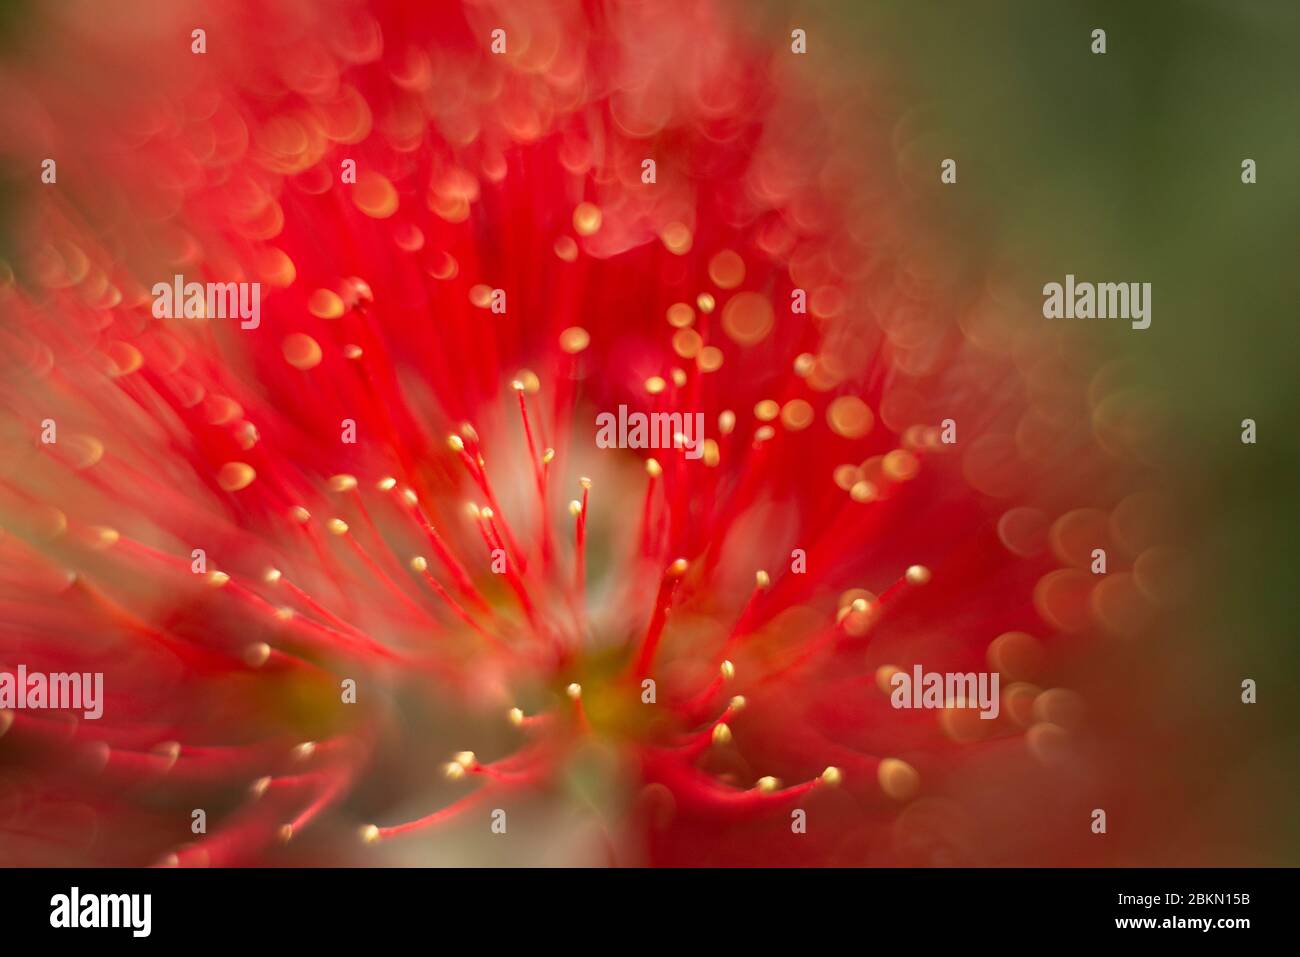 Close-up and dreamy image of the red Pohutukawa flowers Stock Photo